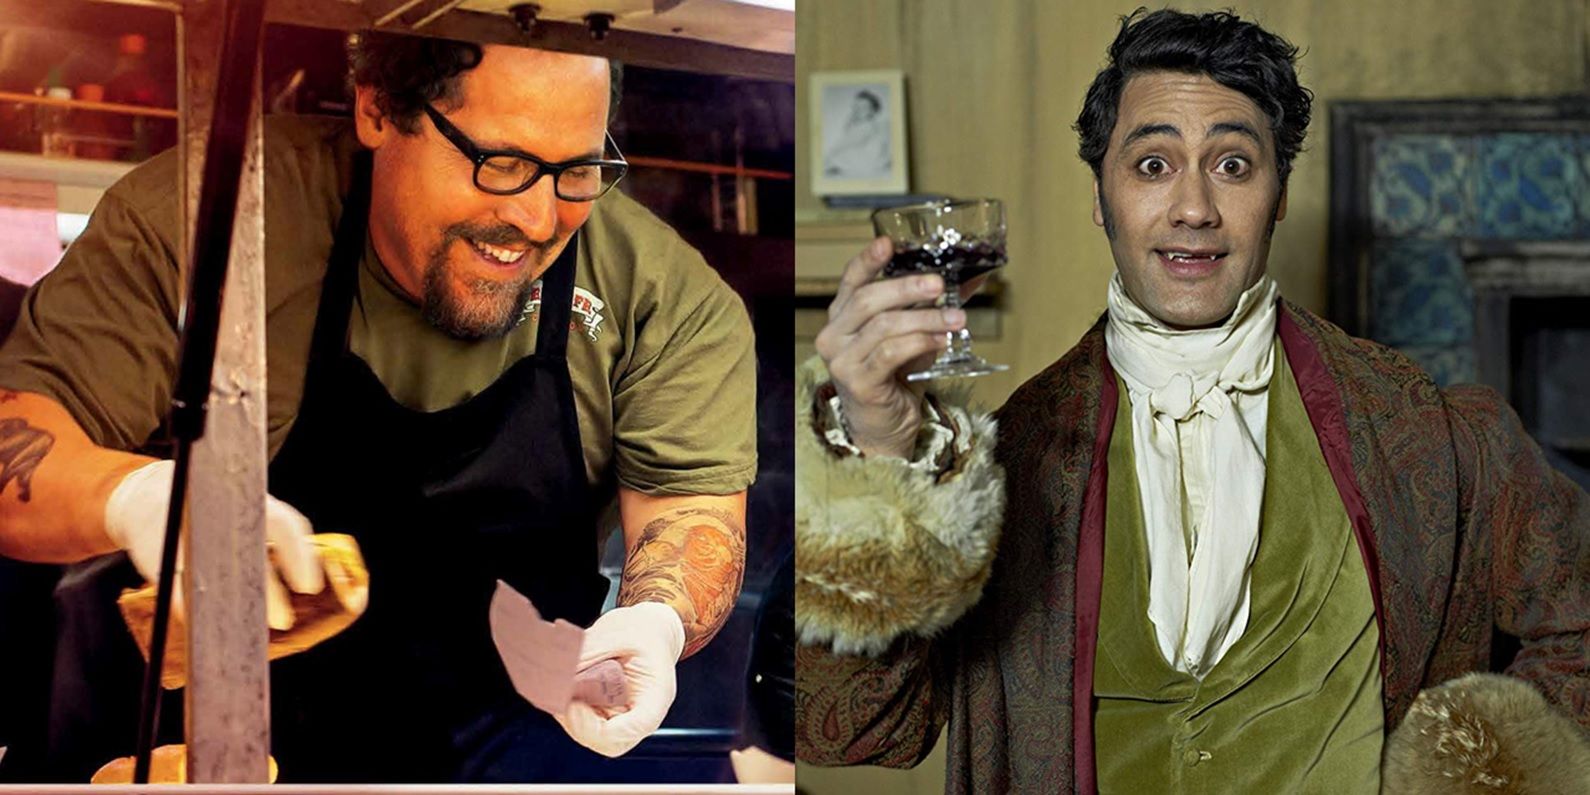 Jon Favreau in Chef and Taika Waititi in What We Do in the Shadows